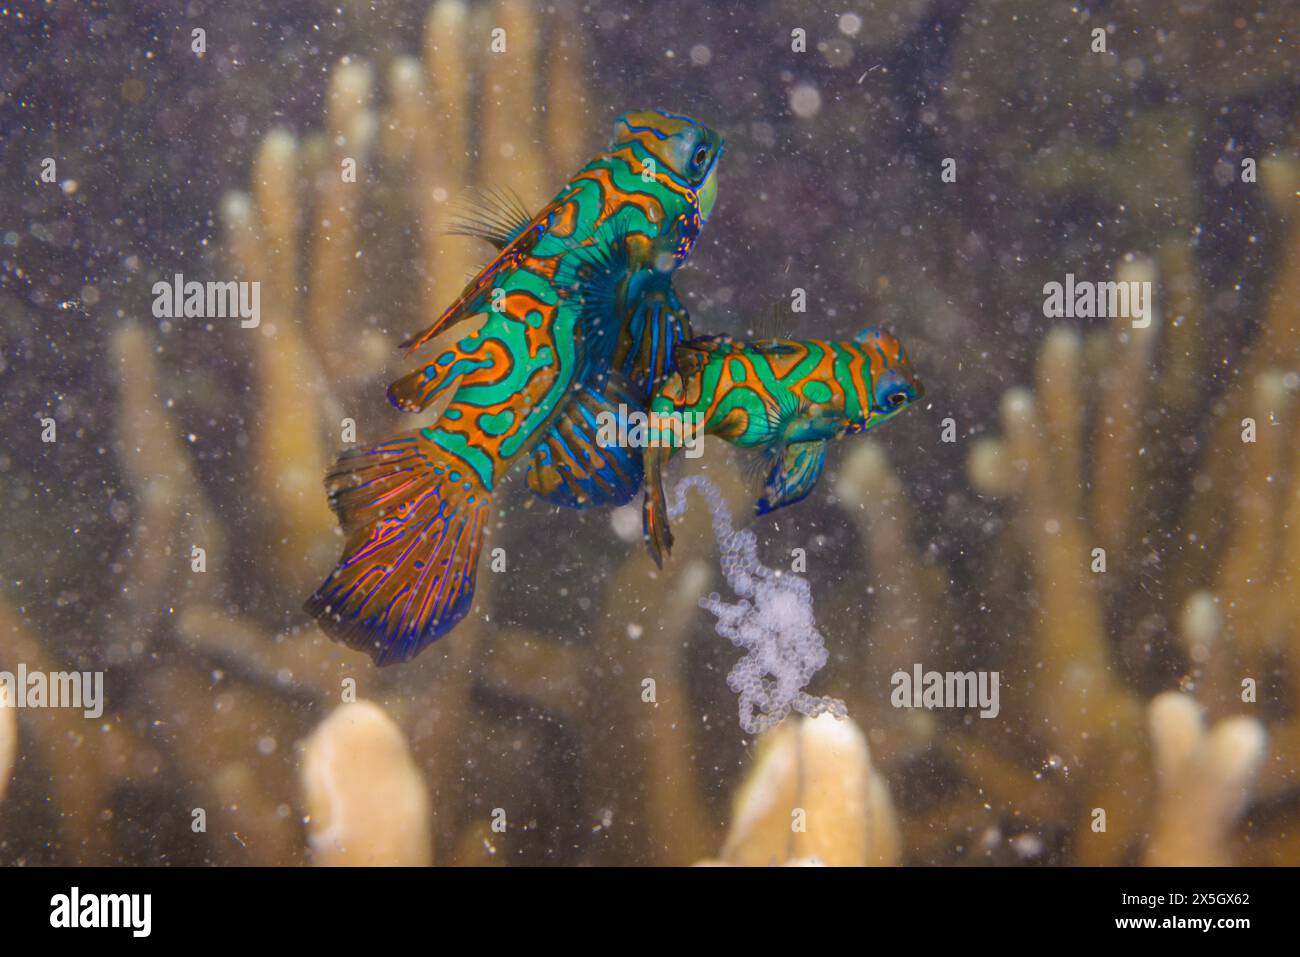 A pair of mating mandarinfish, Synchiropus splendidus, and their just released eggs and sperm, off the island of Yap, Micronesia. Stock Photo